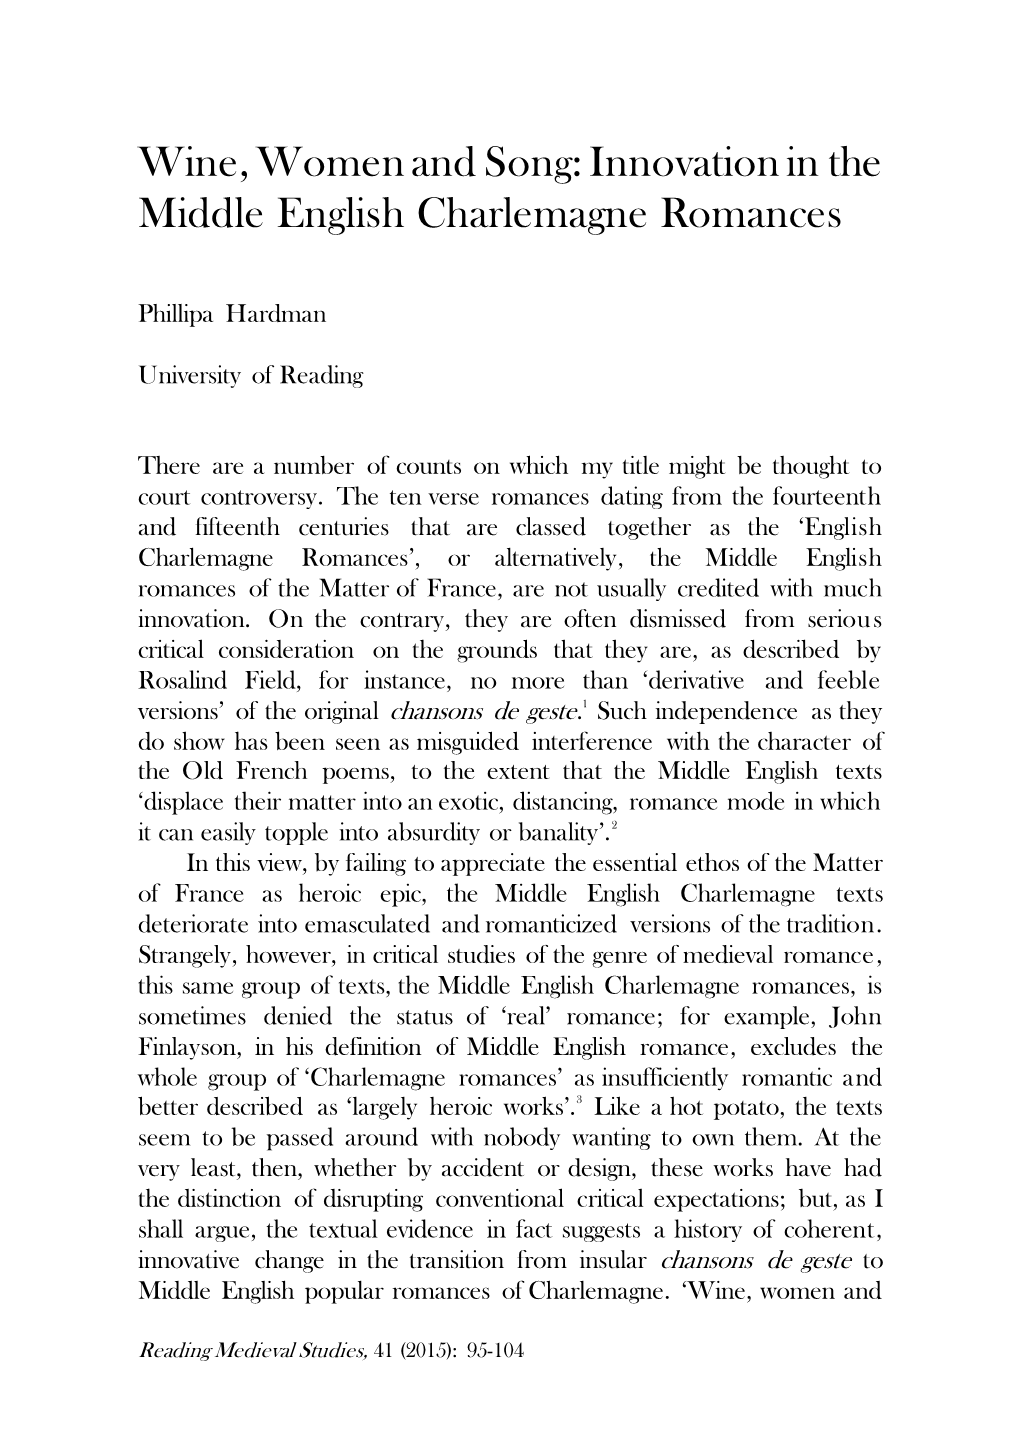 Wine, Women and Song: Innovation in the Middle English Charlemagne Romances